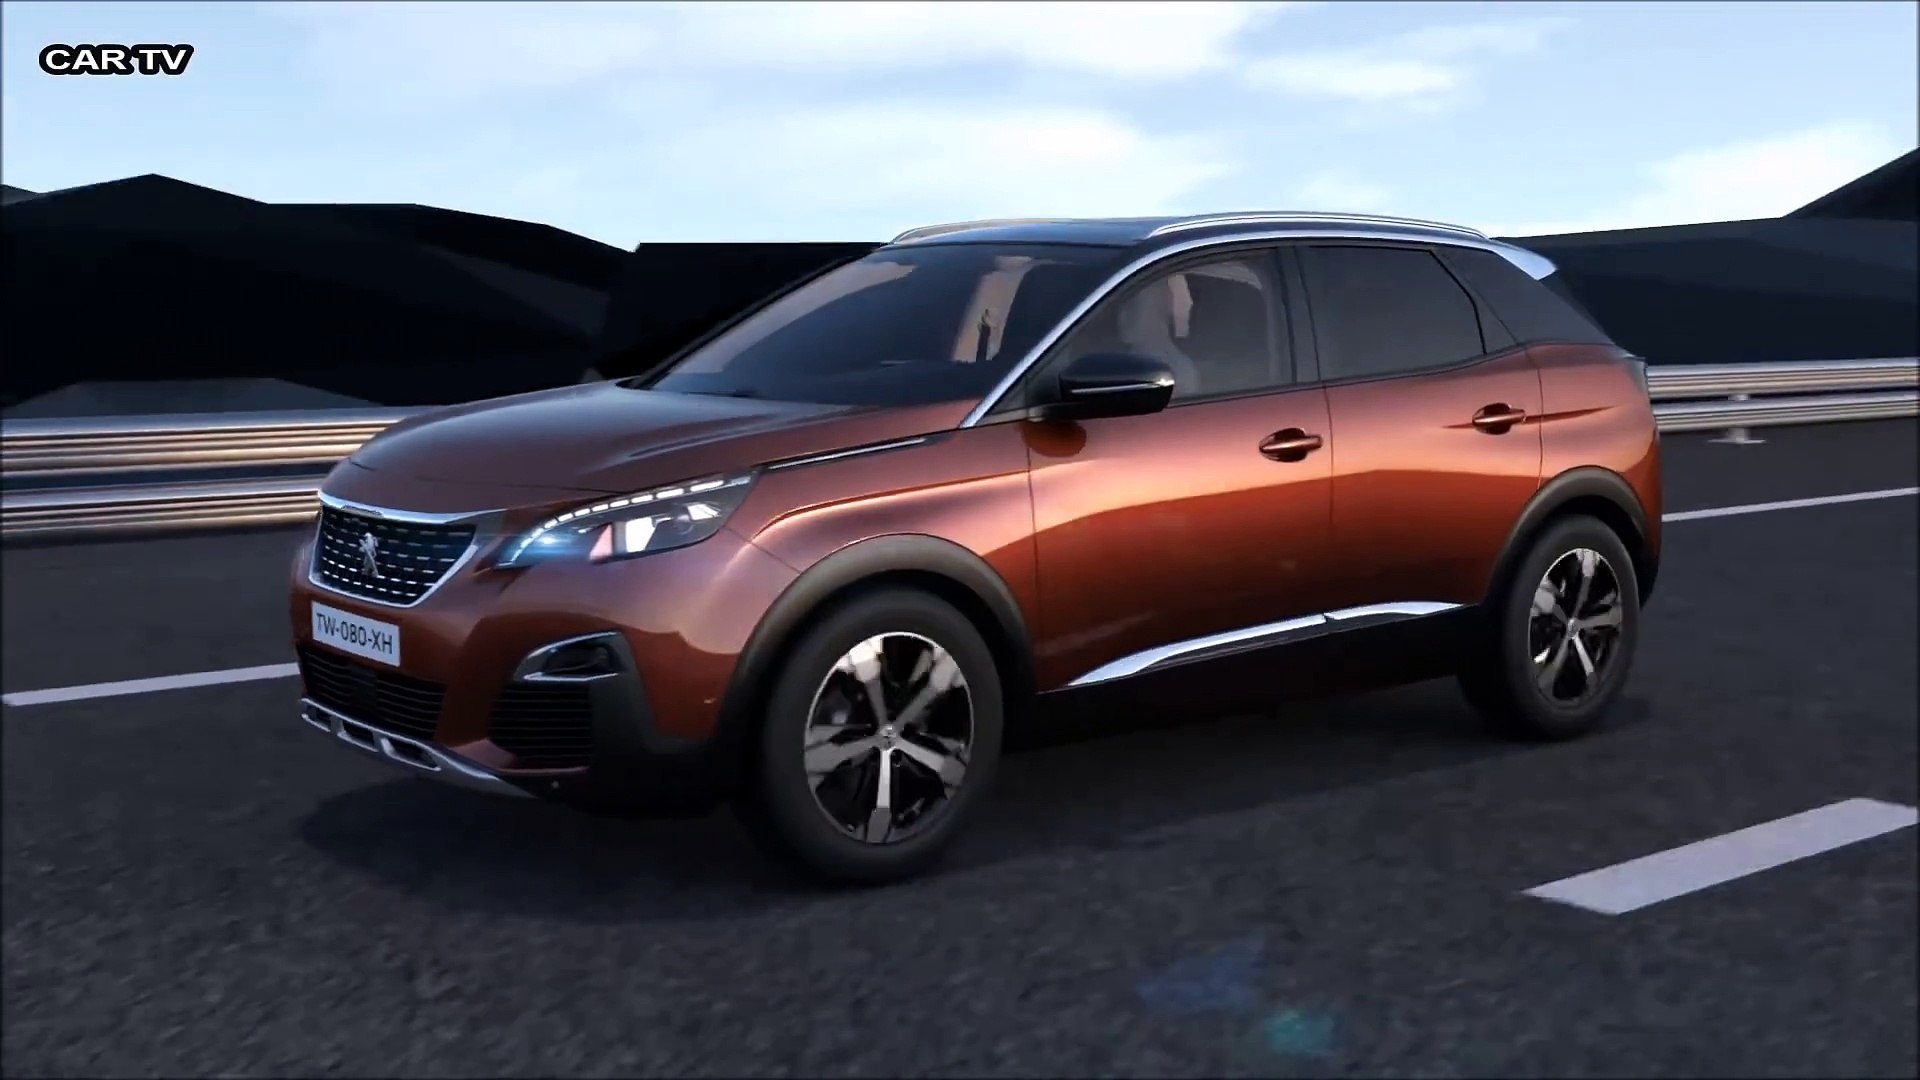 2017 Peugeot 3008 - Driver Assistance Systems - video Dailymotion